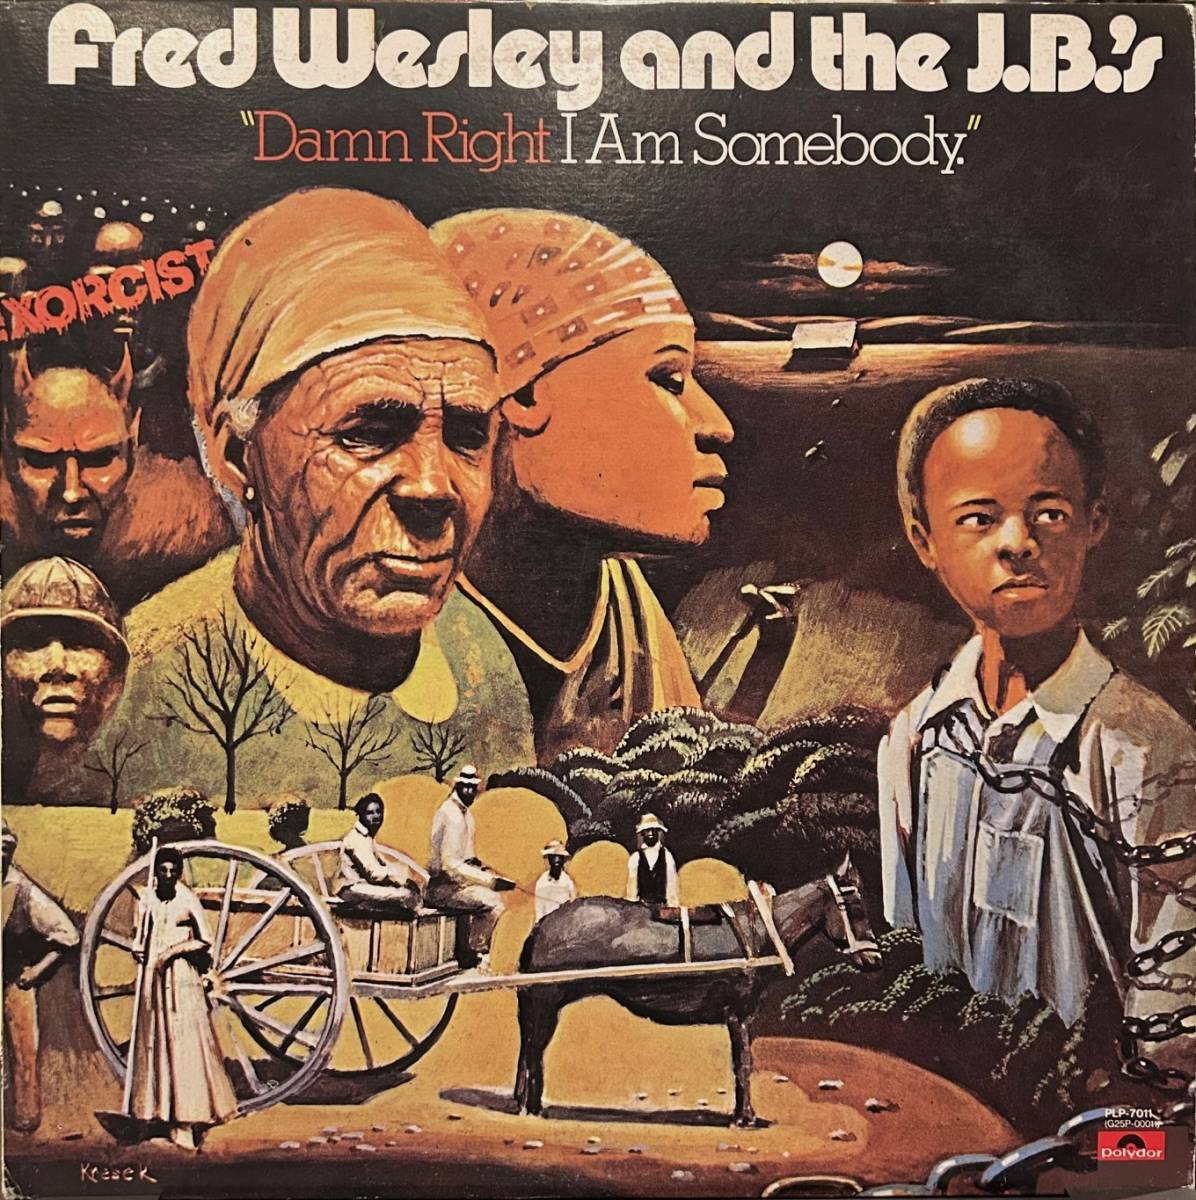 Fred Wesley and The J.B.'s - Damn Right I Am Somebody / 文句無しのキラー・チューン満載のアルバムです！_画像1